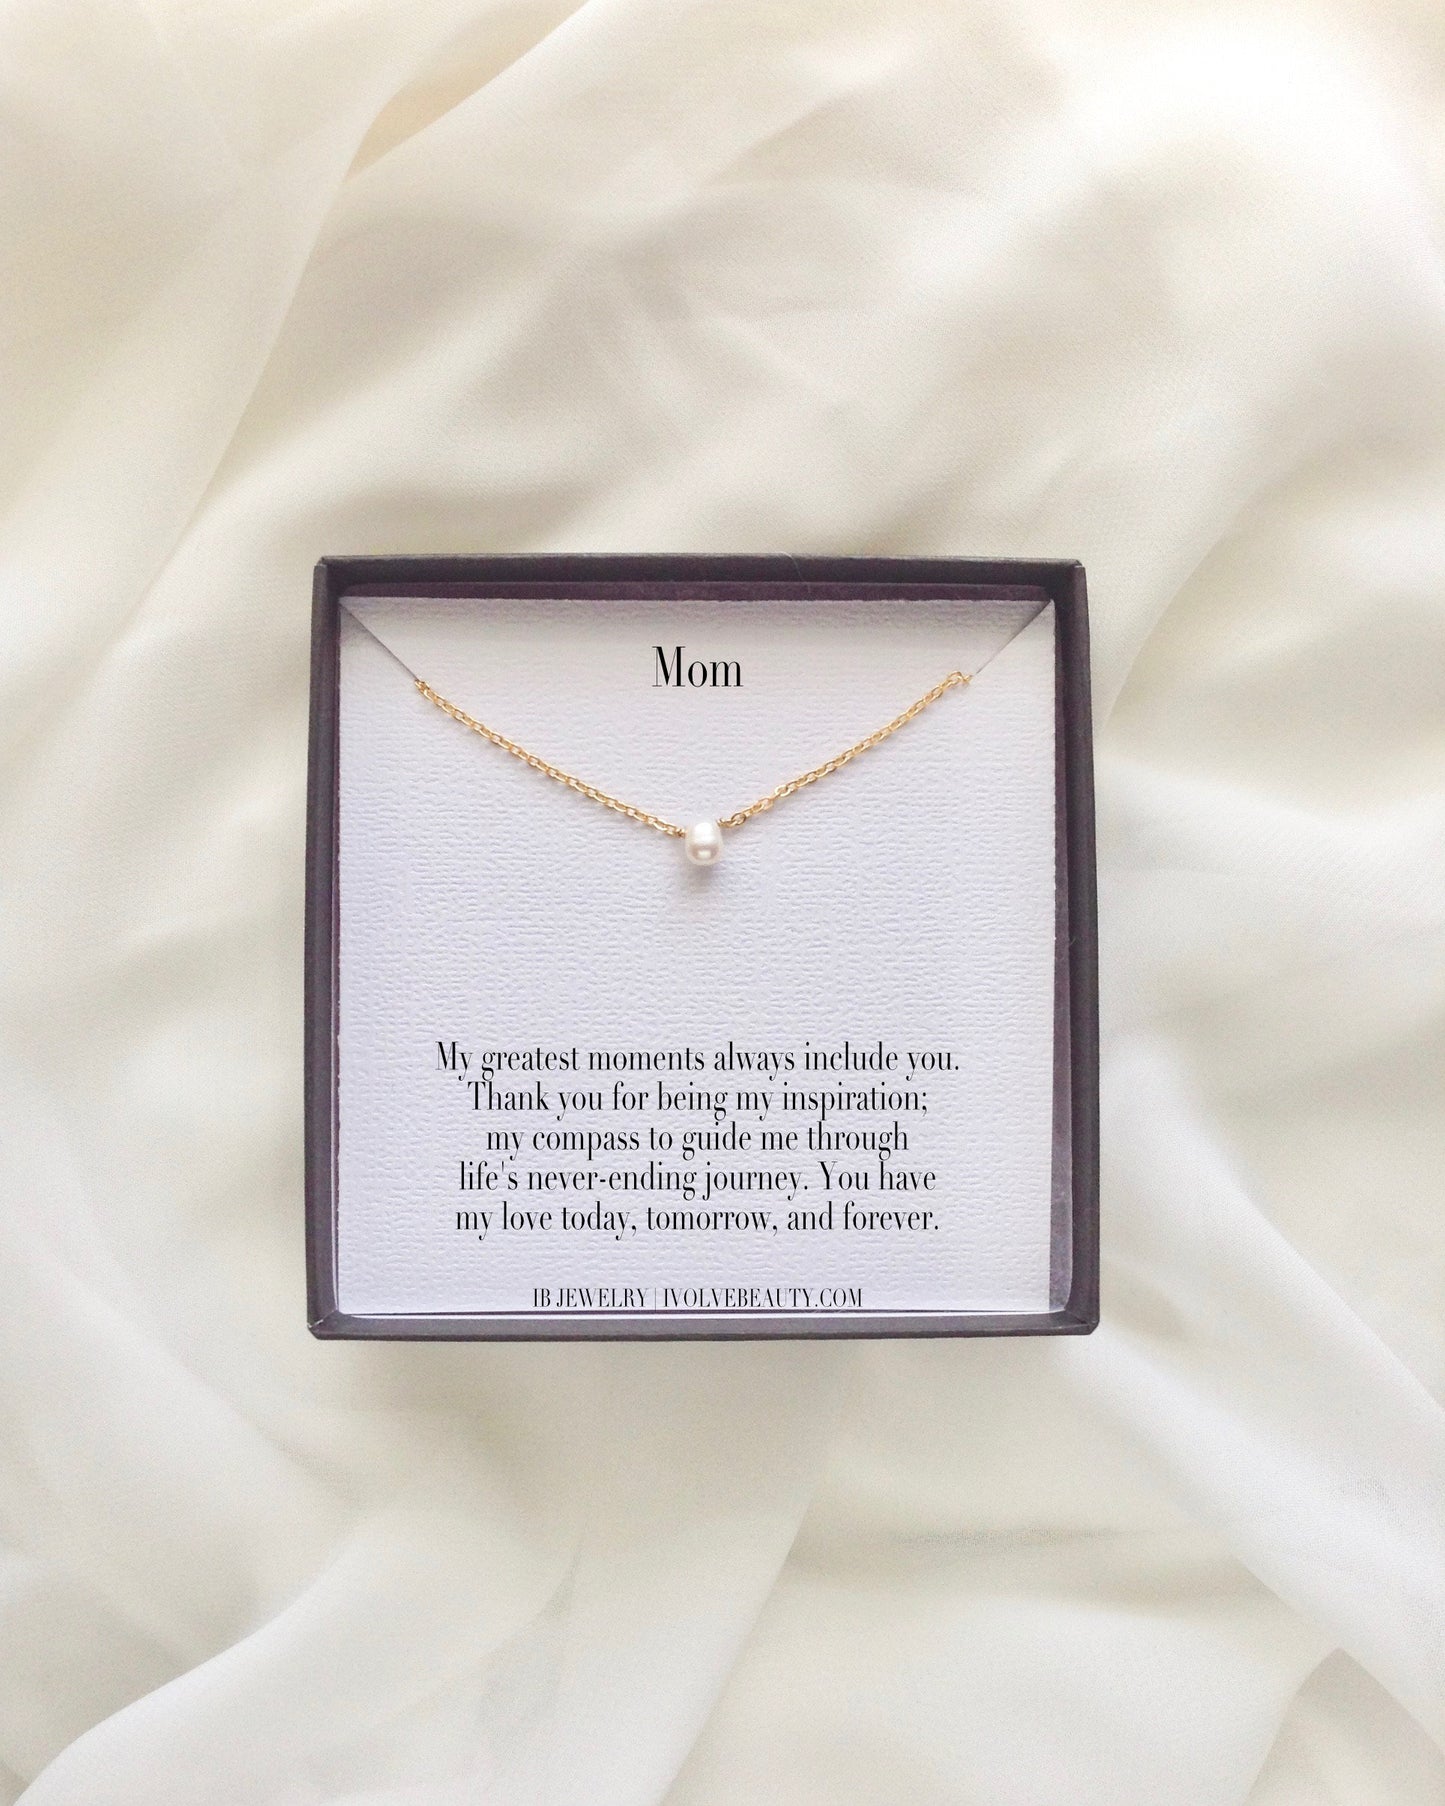 Mom Meaningful Necklace Gift | IB Jewelry